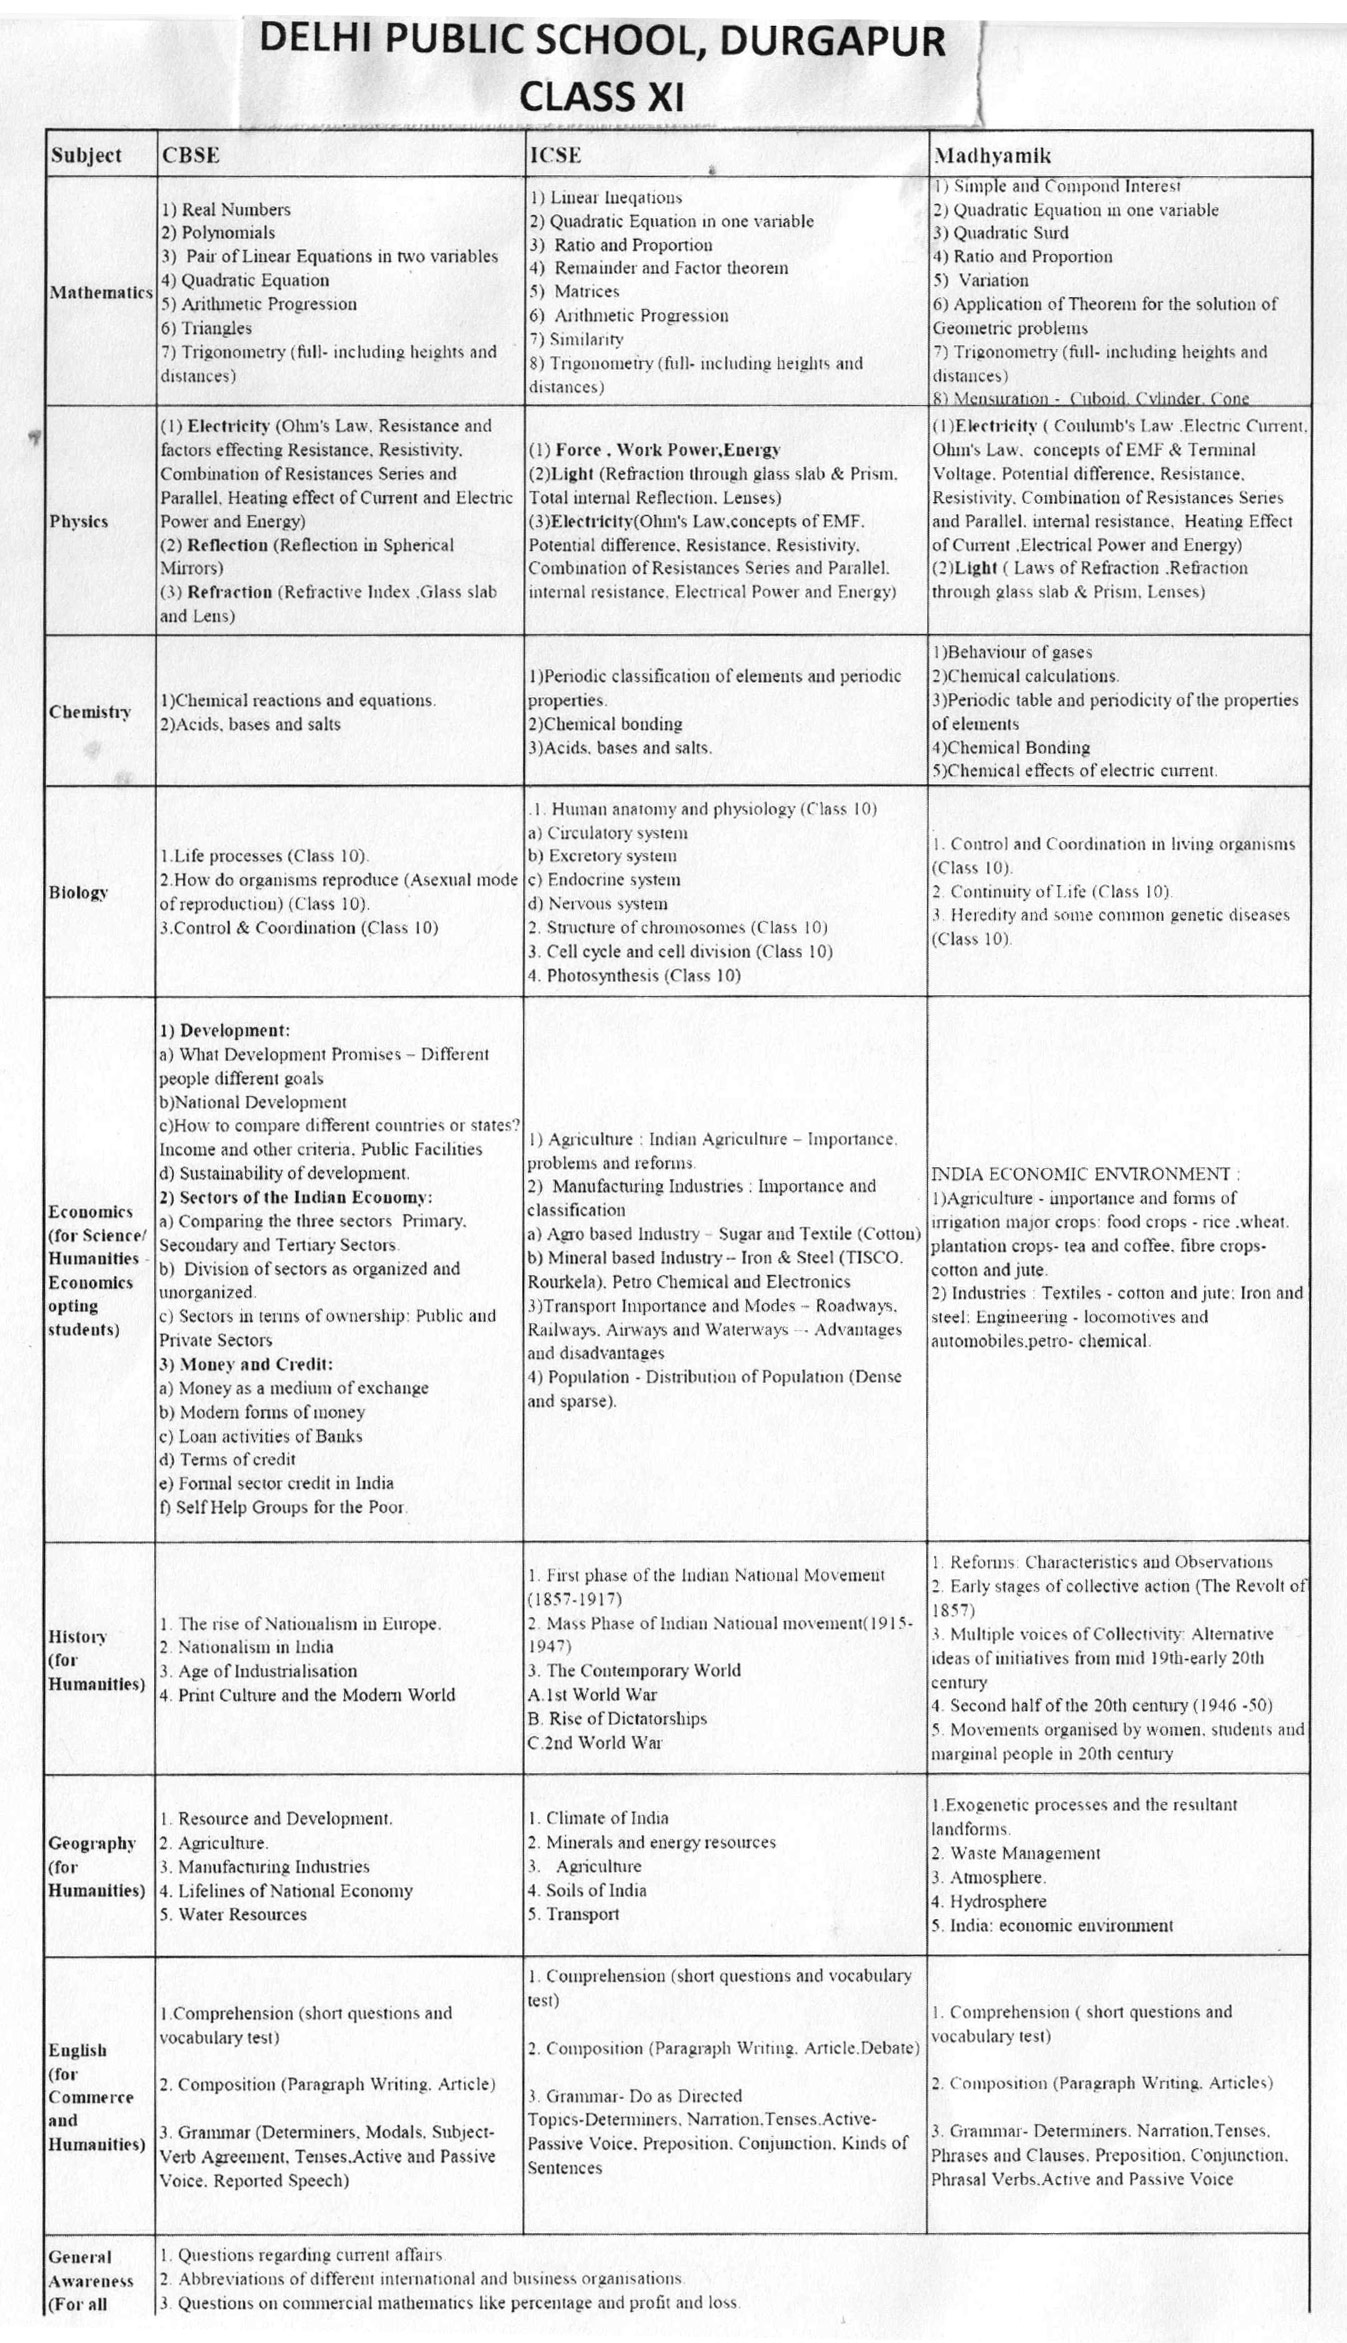 Syllabus for Admission Test